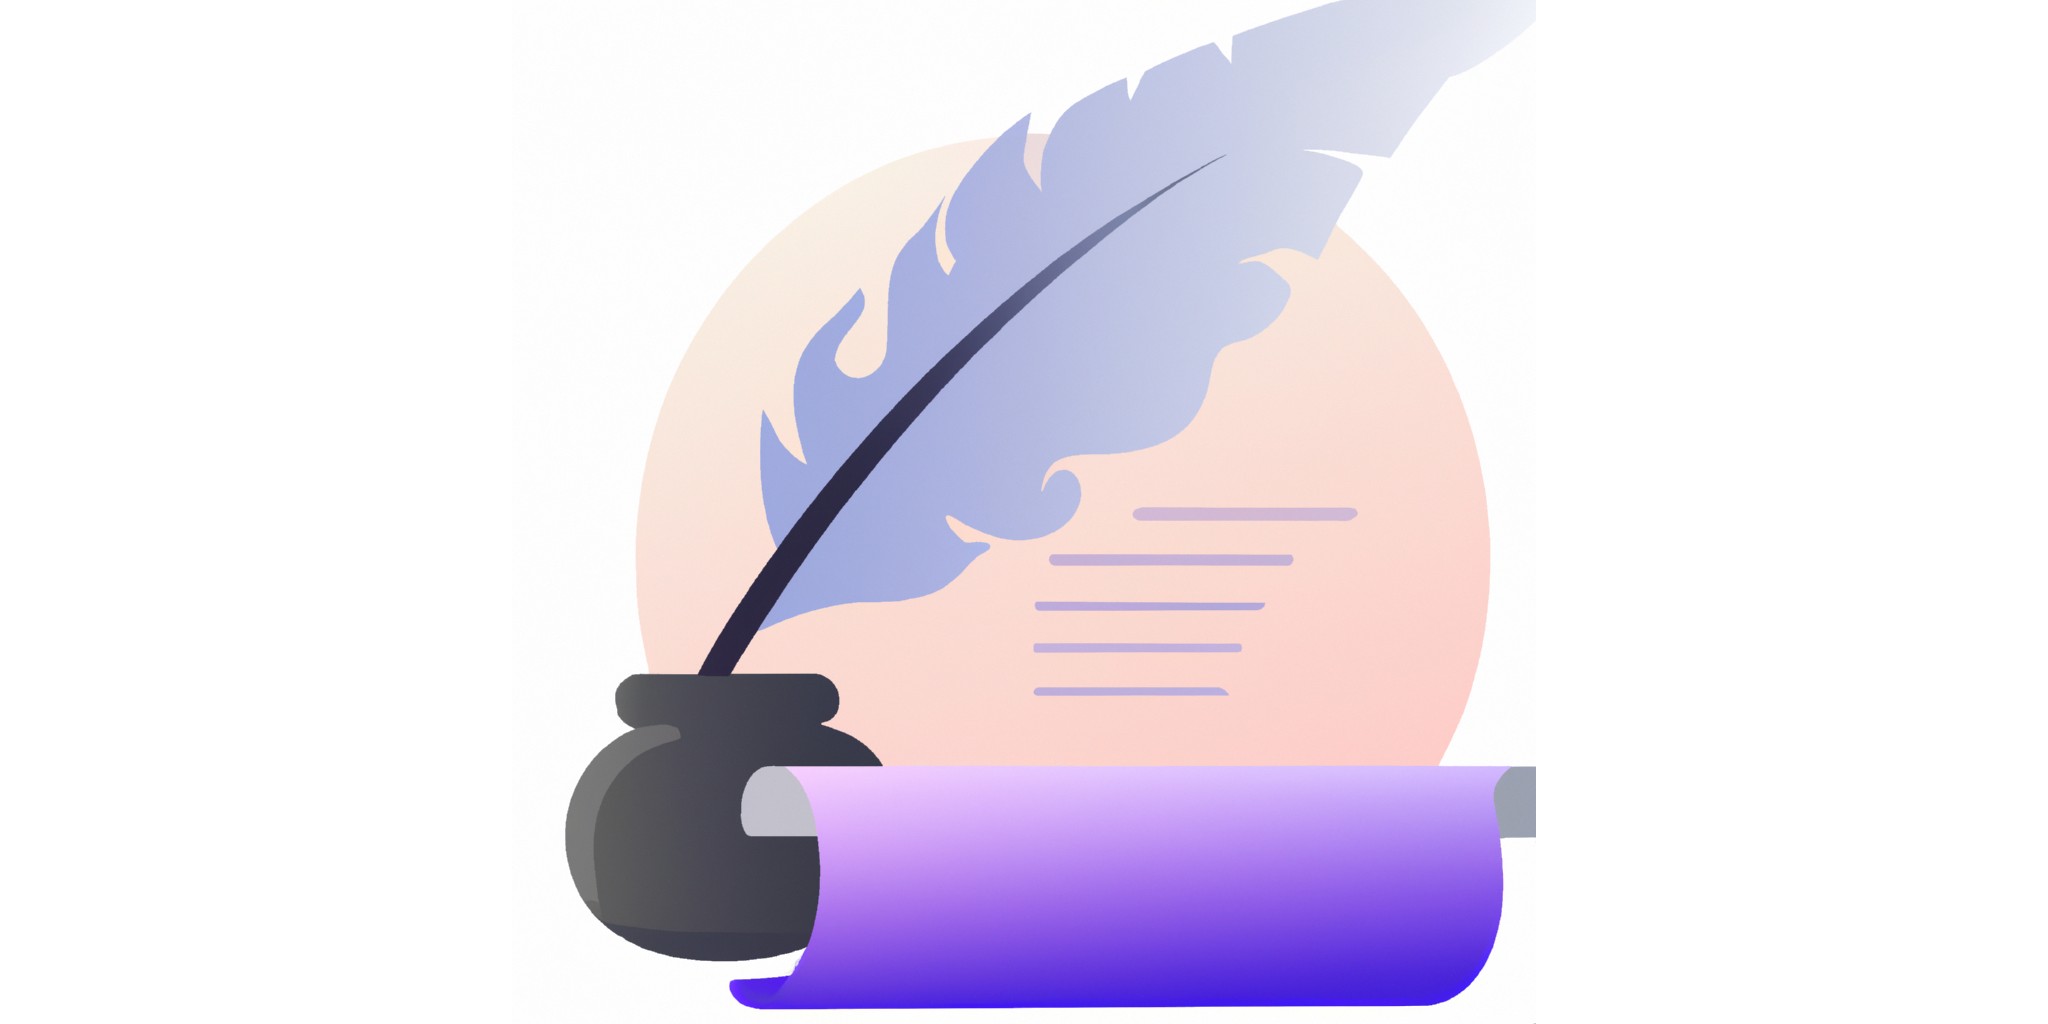 a scroll and quill in flat illustration style with gradients and white background